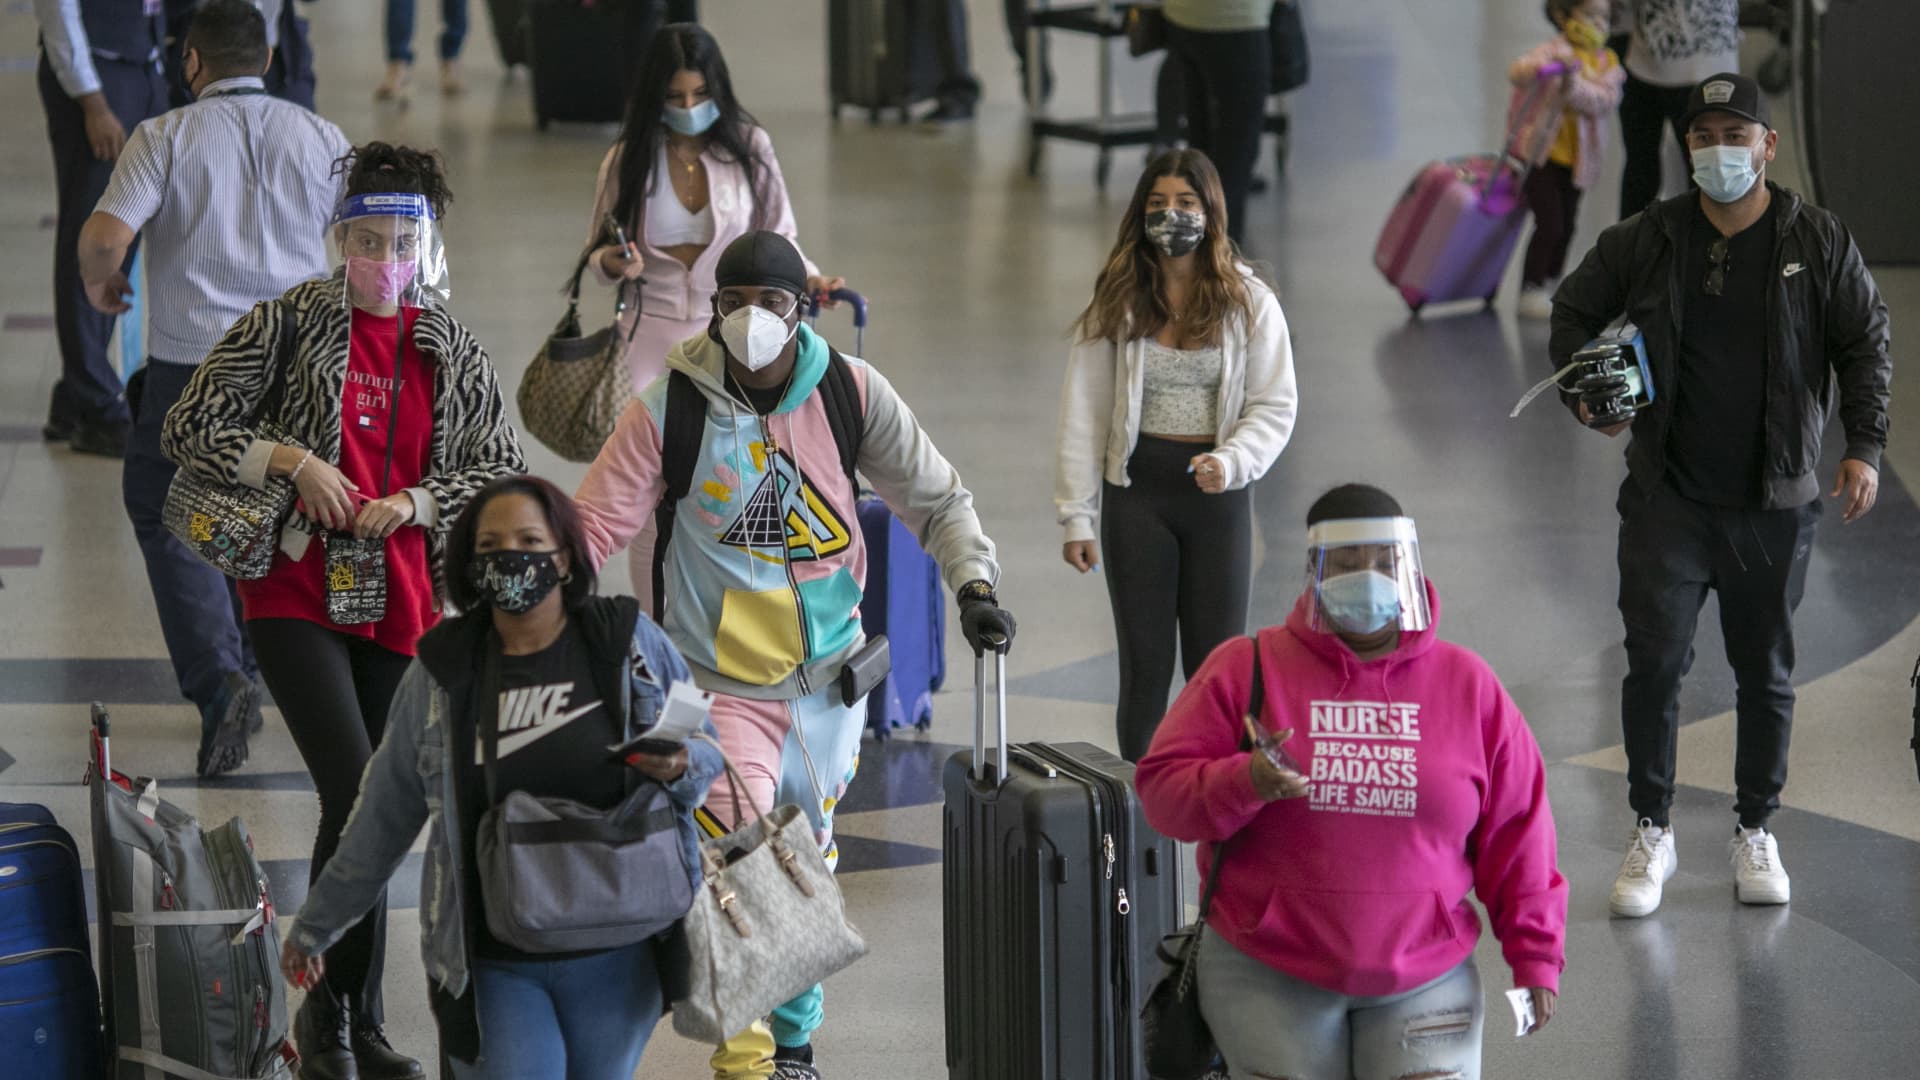 Holiday travelers pass through Los Angeles international Airport on Thanksgiving eve as the COVID-19 spike worsens and stay-at-home restrictions are increased on November 25, 2020 in West Hollywood, California.